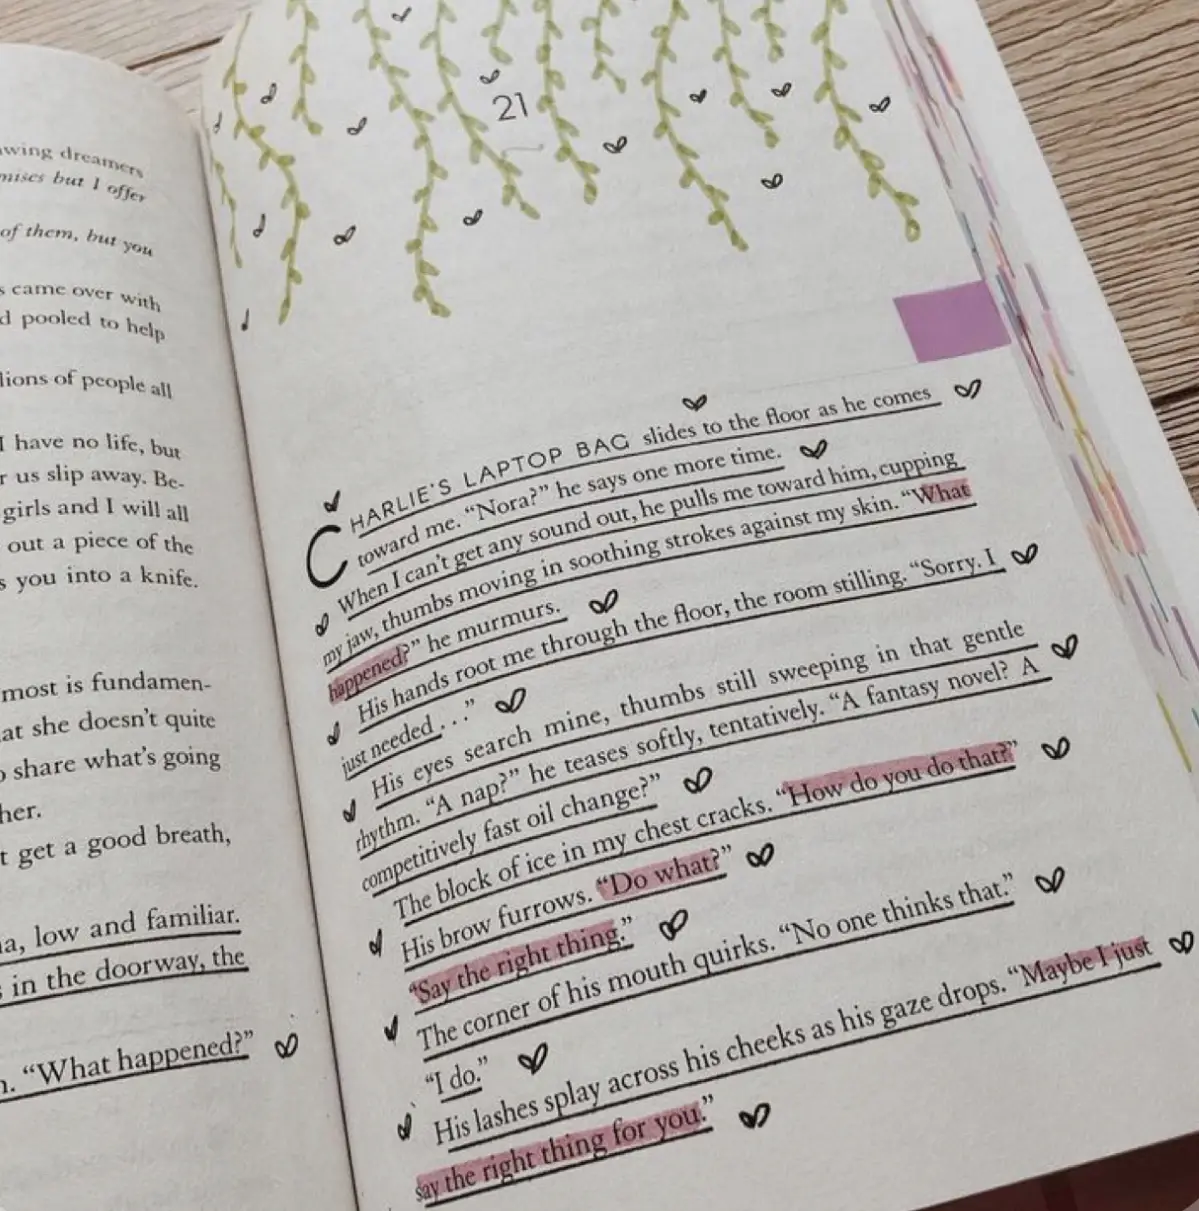 📘Annotating Books✍🏻 I began my annotation journey a few months